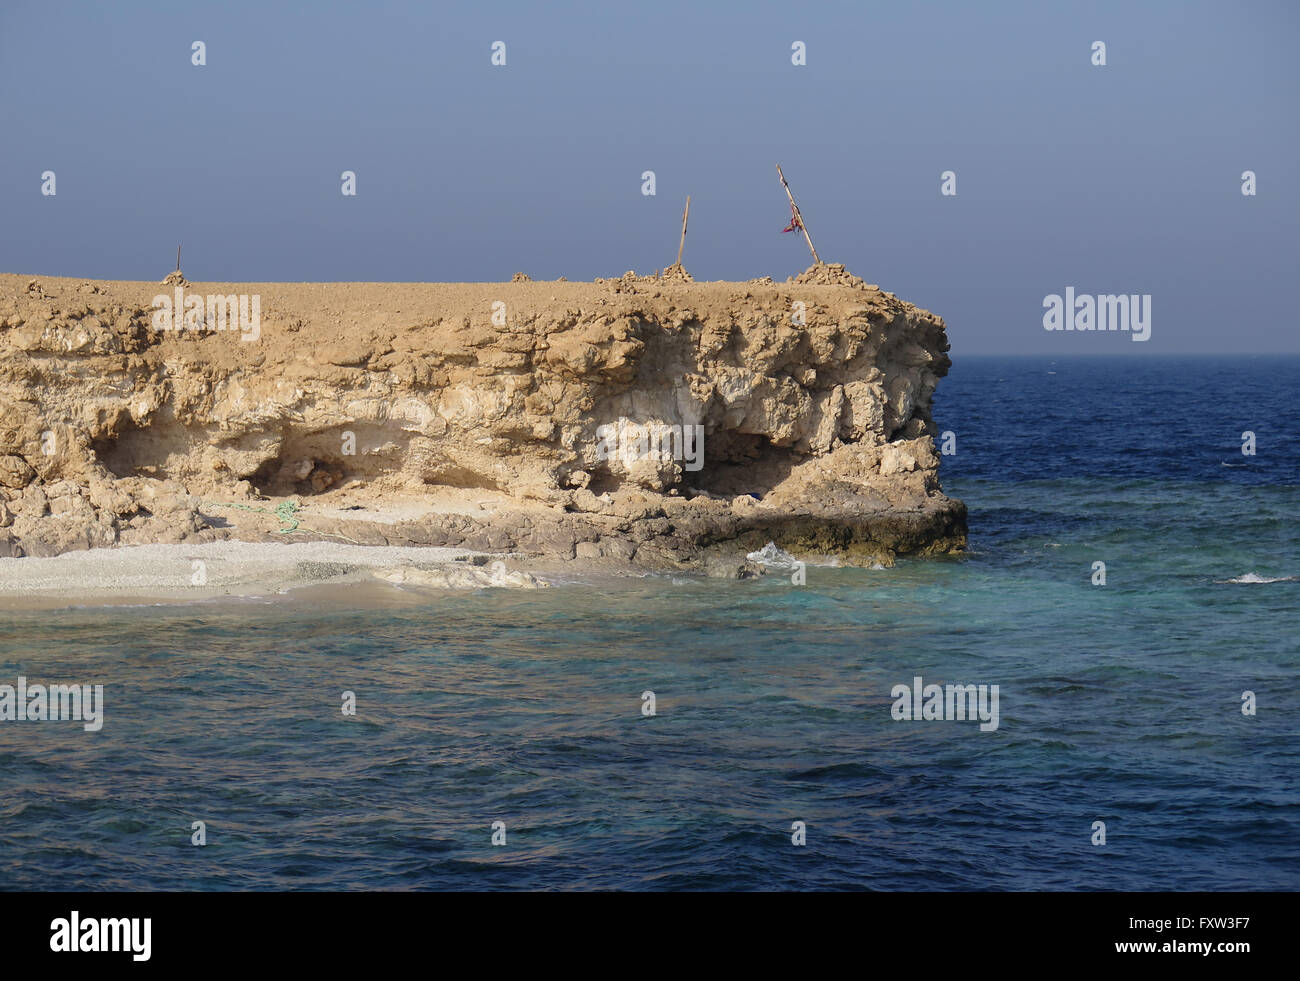 Insel, Little Bother, Brother Islands, Rotes Meer, Aegypten Stock Photo